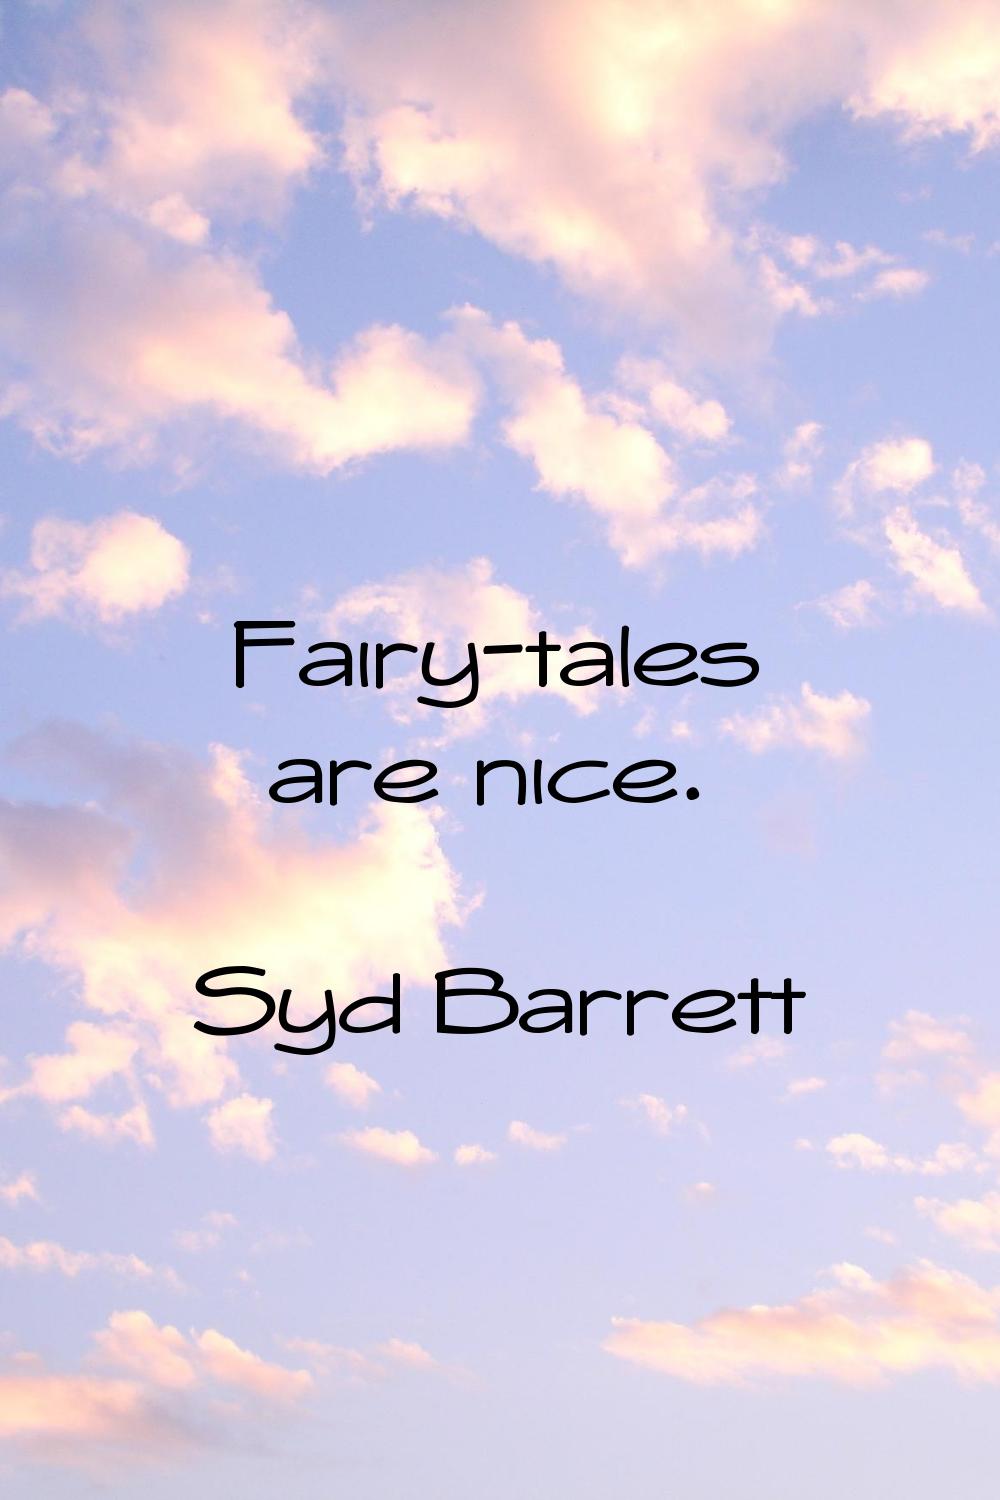 Fairy-tales are nice.